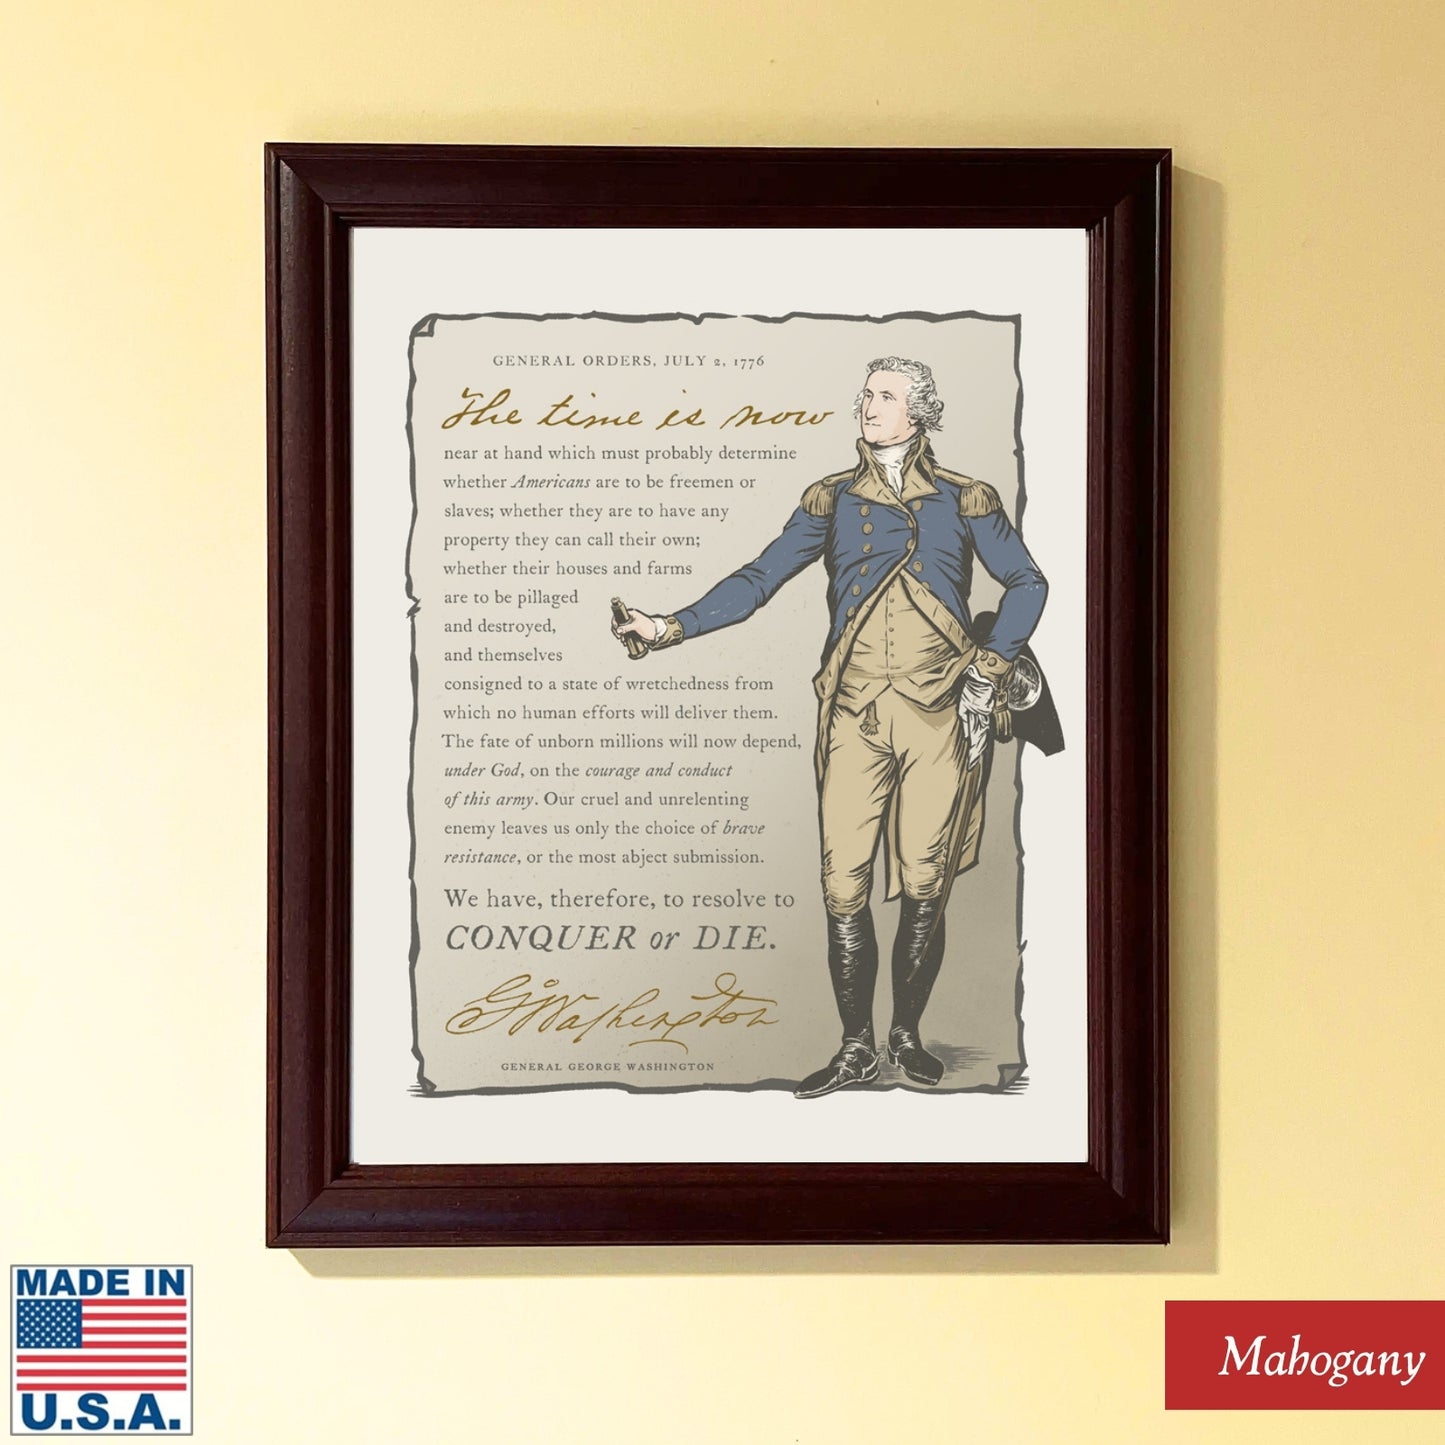 "Conquer or Die" — George Washington's General Orders framed print made in America